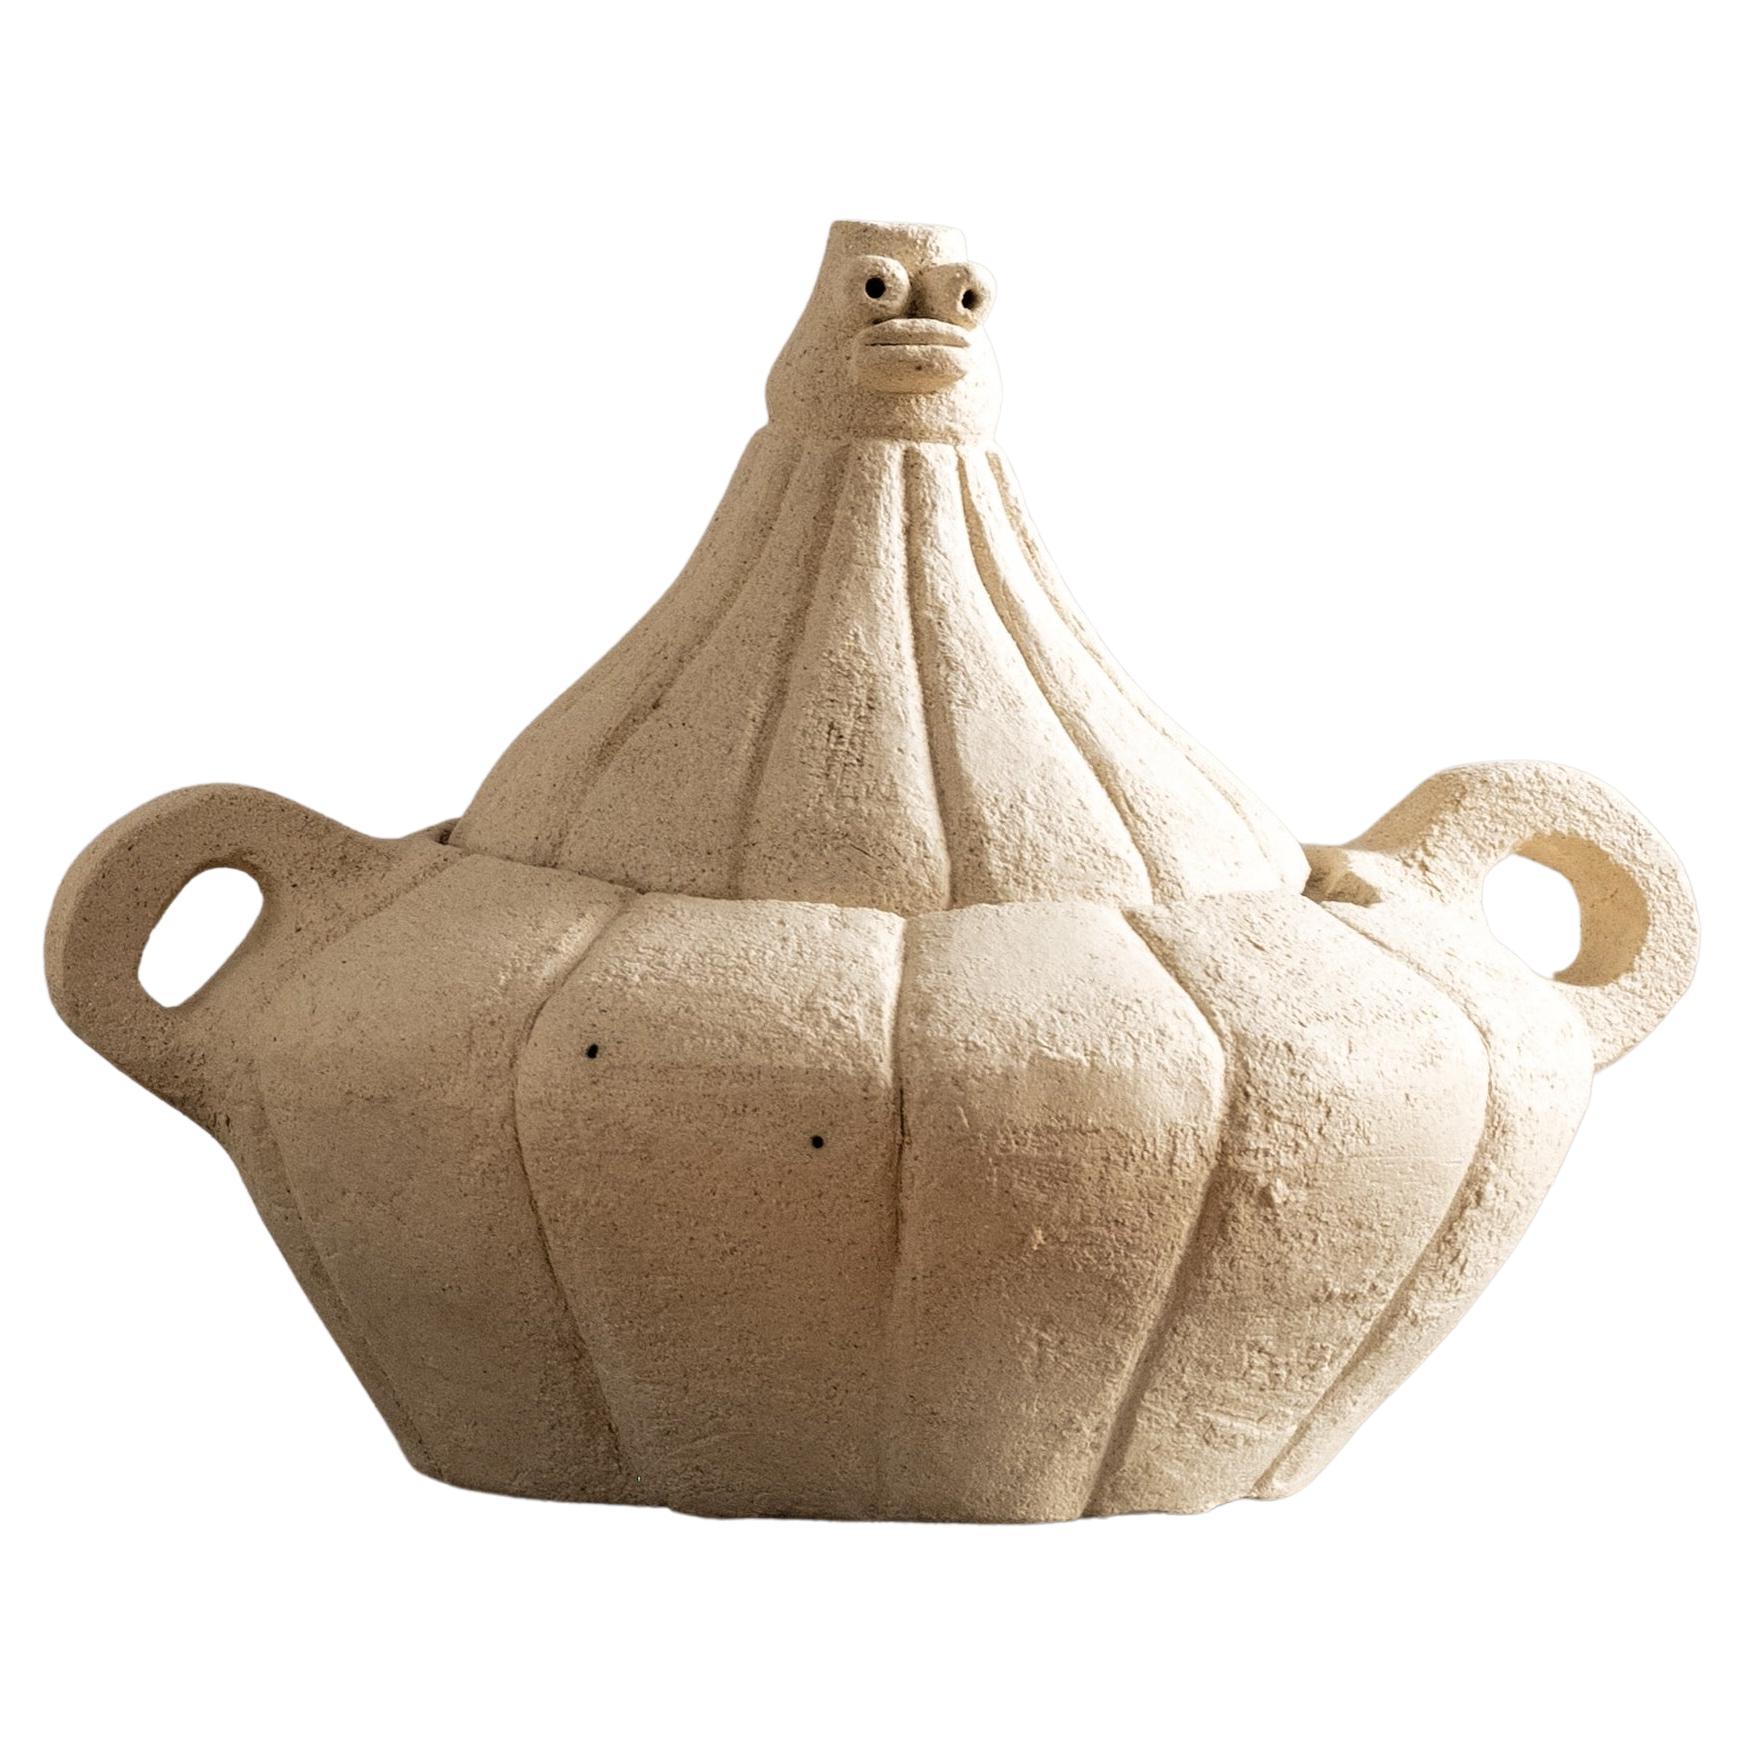 Fantastical Figural and Functional Fire Clay Ceramic Tureen Handmade in Spain